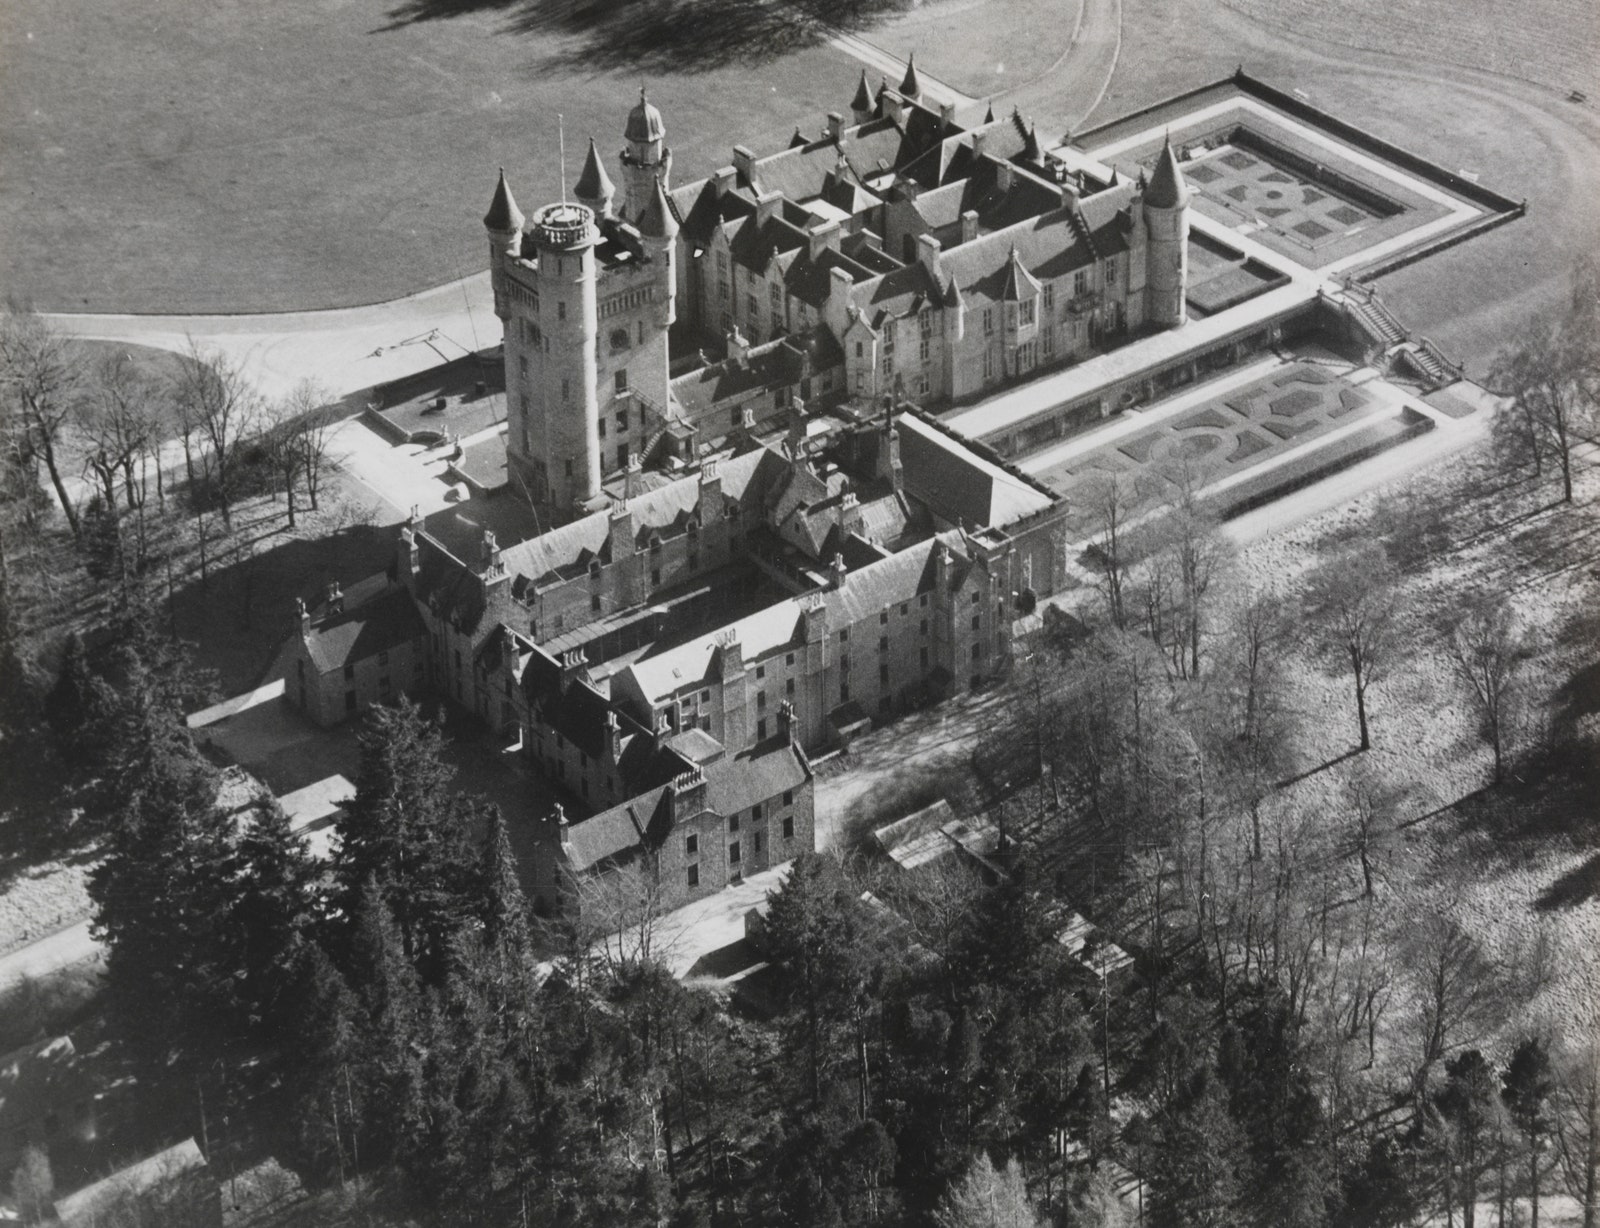 aerial view of Balmoral castle